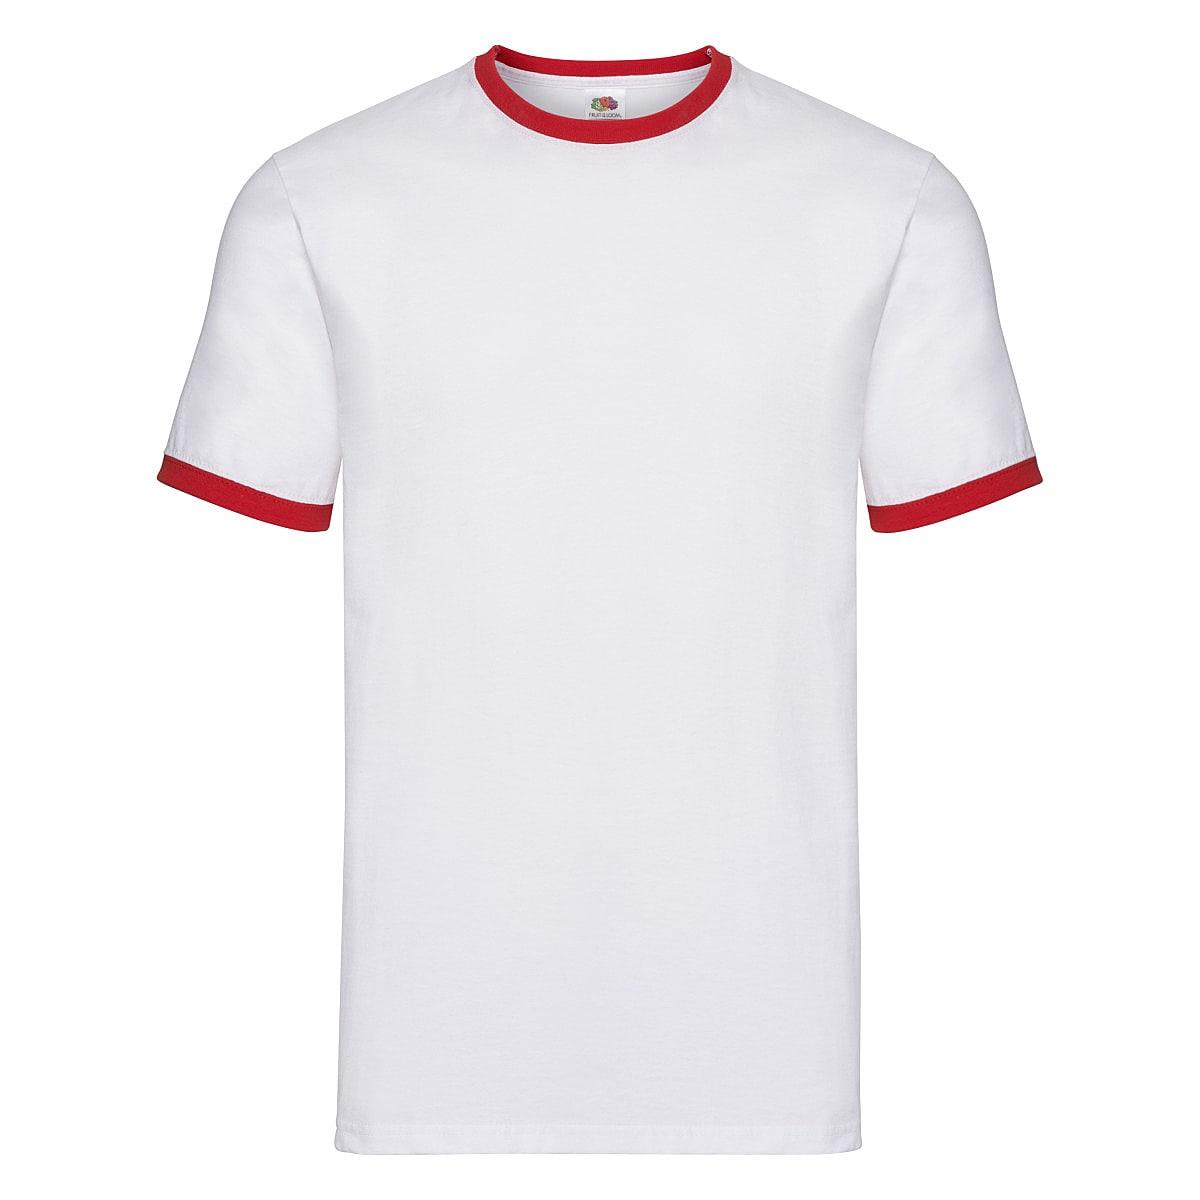 Fruit Of The Loom Ringer T-Shirt in White / Red (Product Code: 61168)